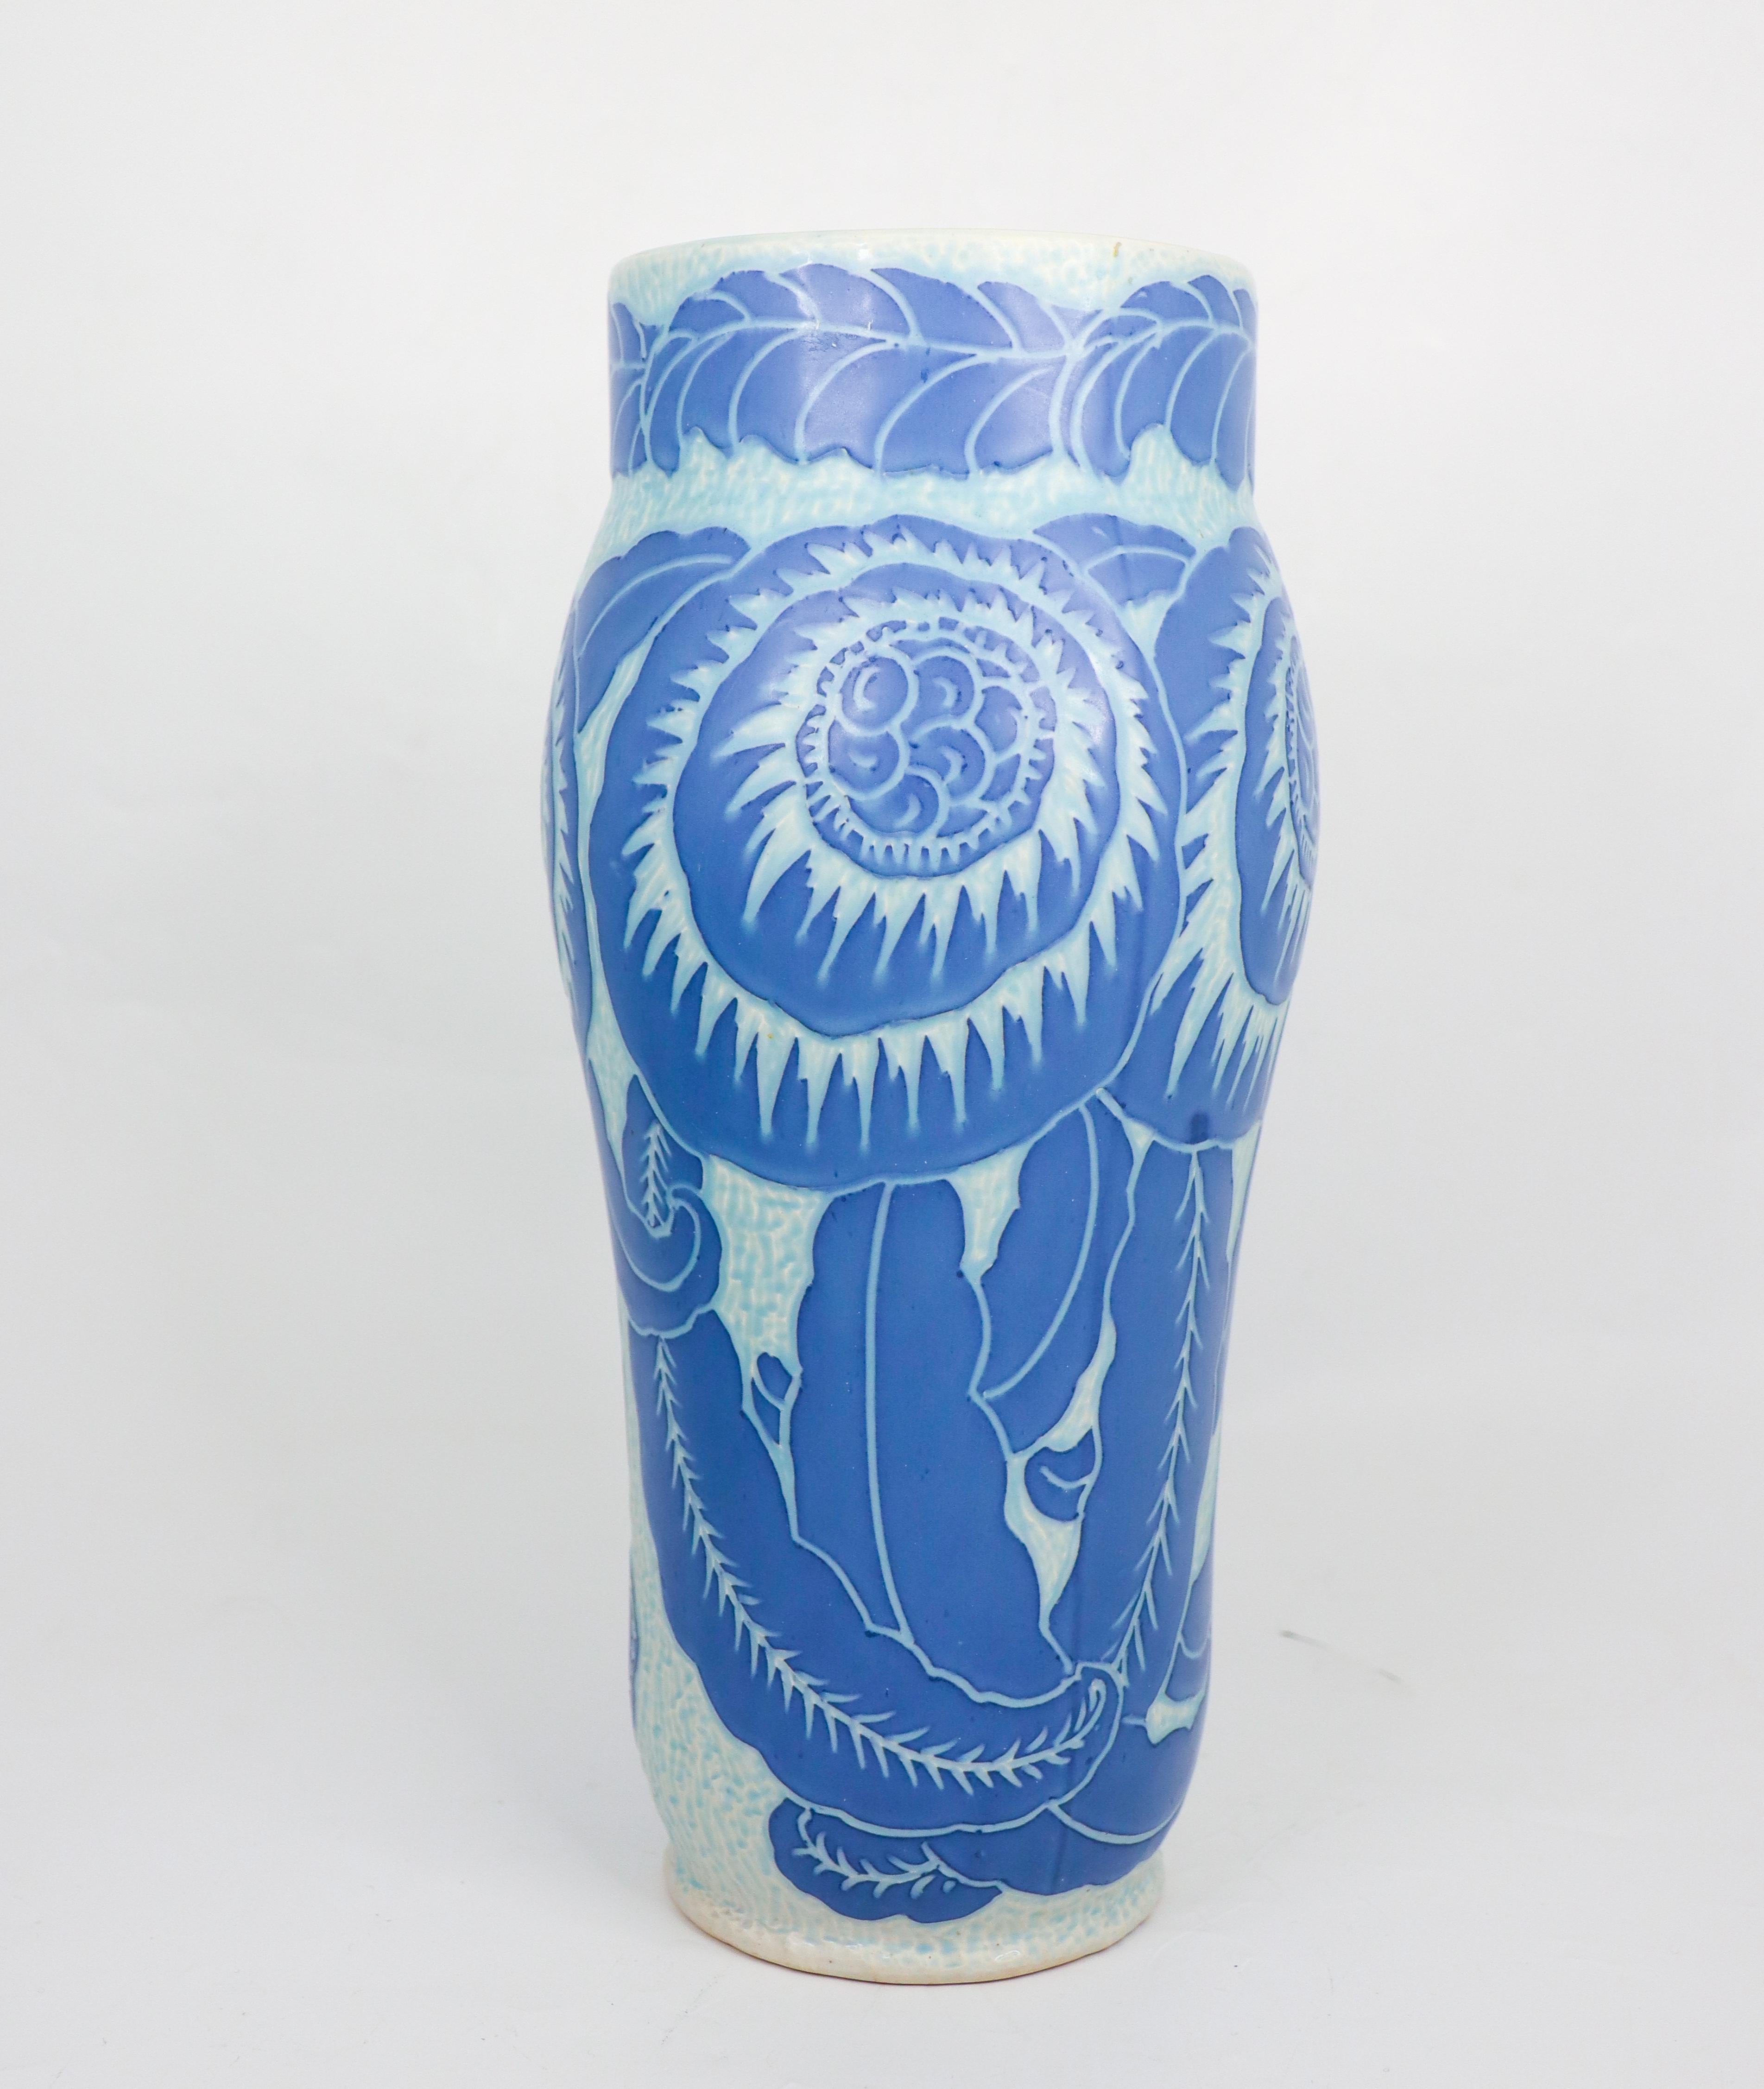 An art nouveau vase in ceramics designed by Josef Ekberg at Gustavsberg in 1918, this vase is from the classic Sgrafitto-serie. The vase is 30.5 cm (12.2